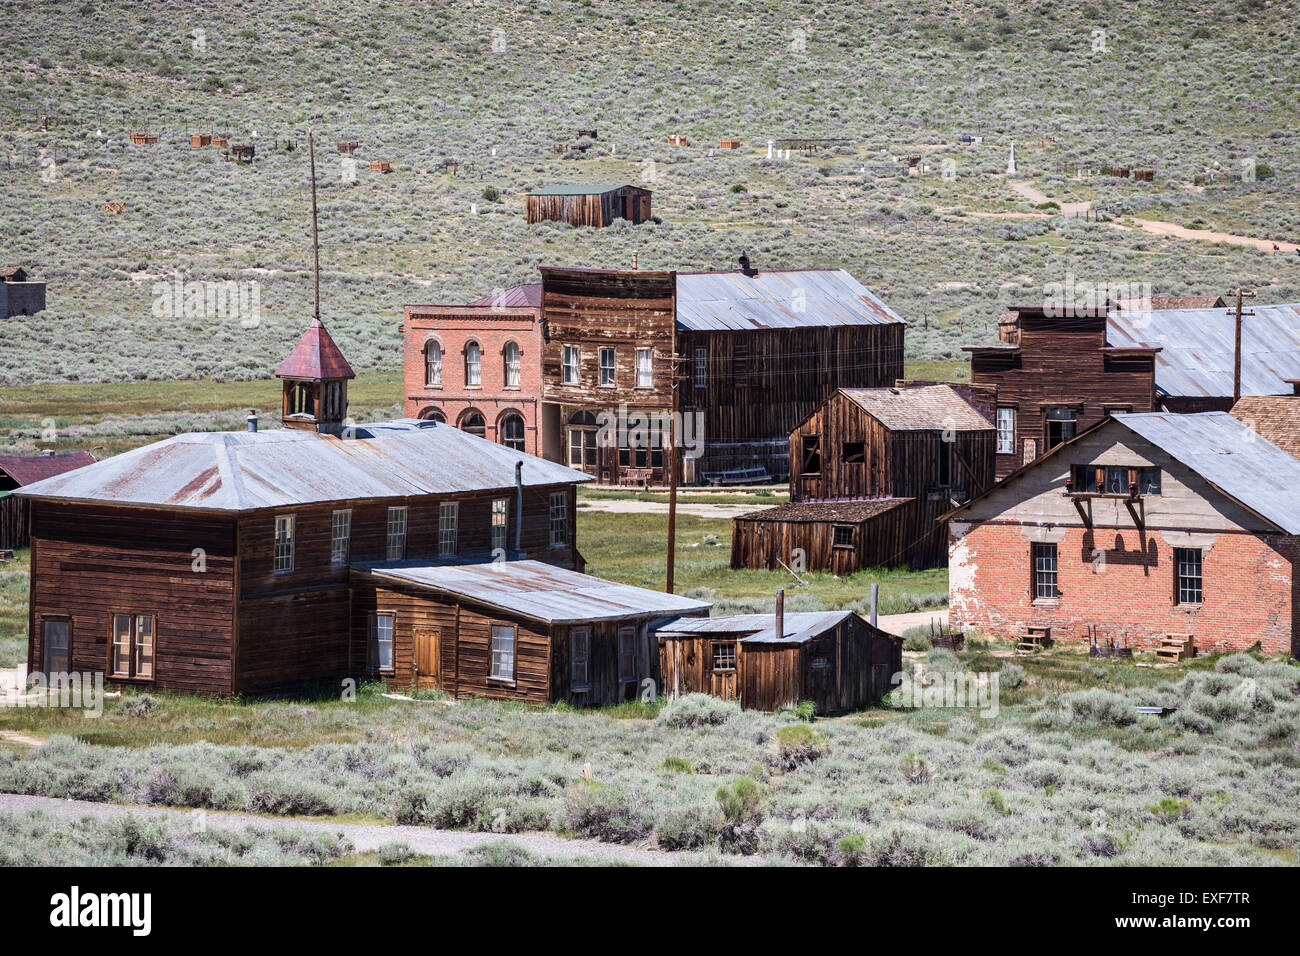 Bodie ghost town buildings at Bodie State Historic Park in California. Stock Photo